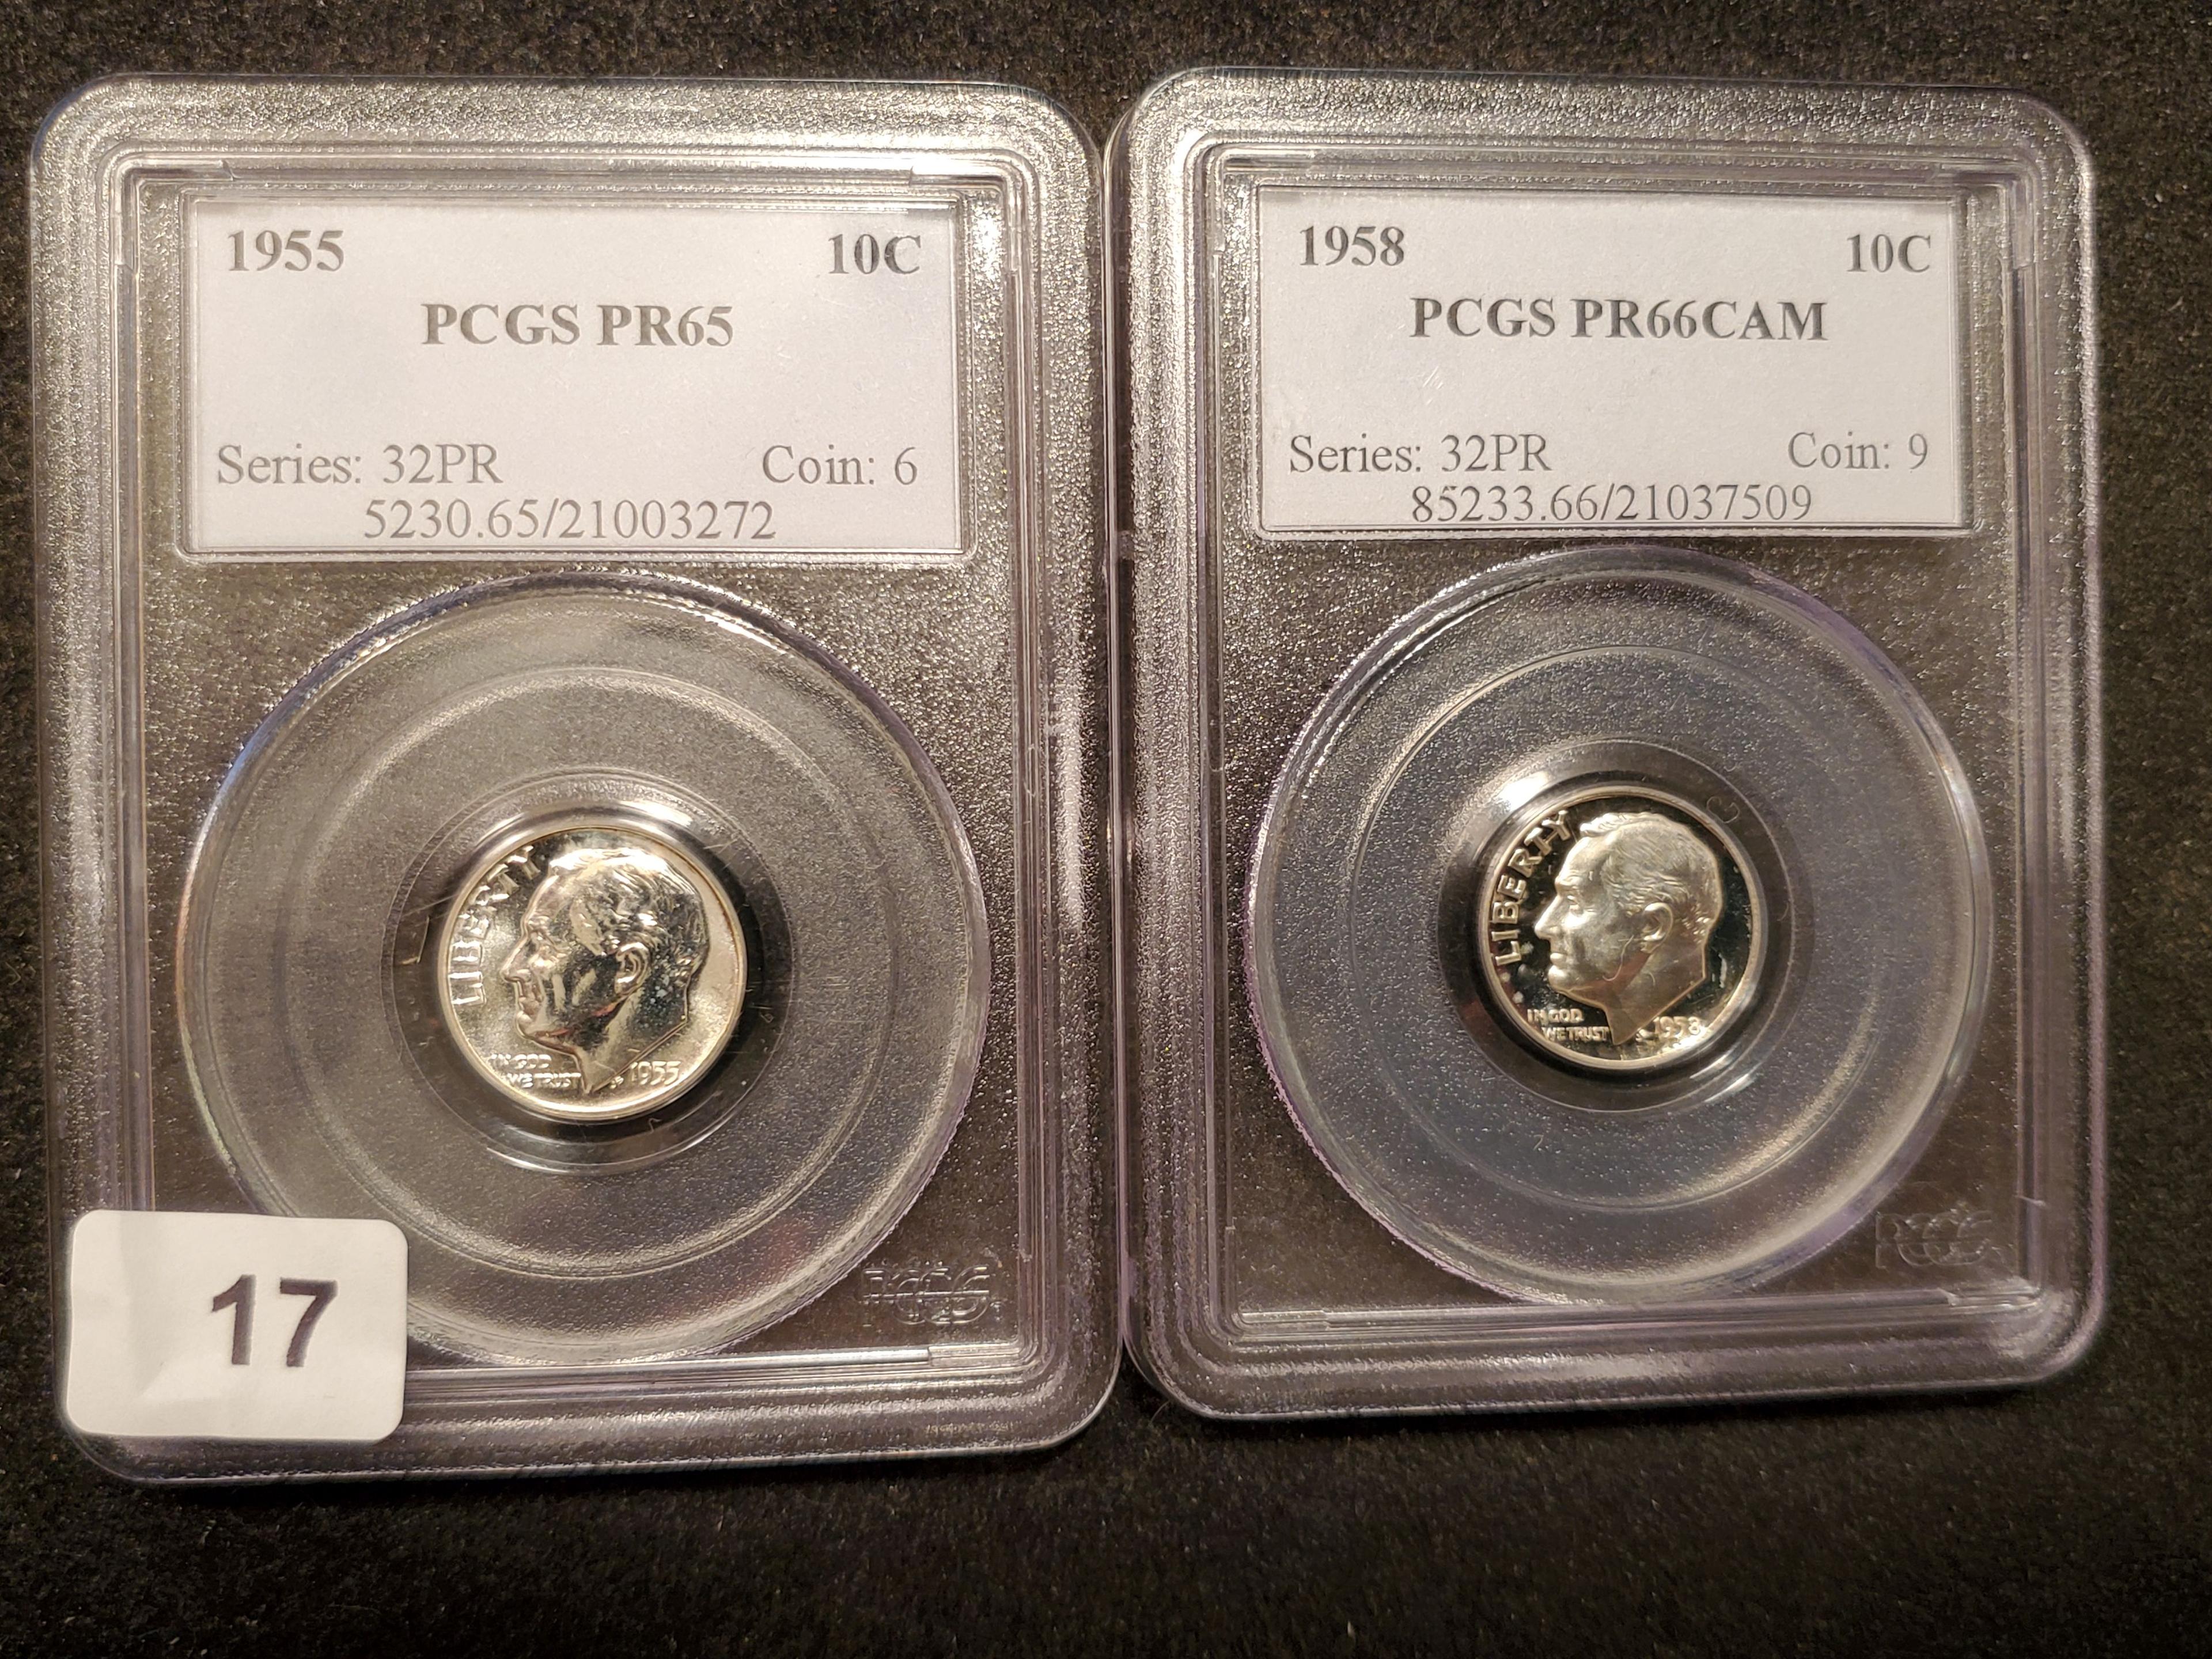 Two PCGS-Slabbed silver Proof Roosevelt Dimes